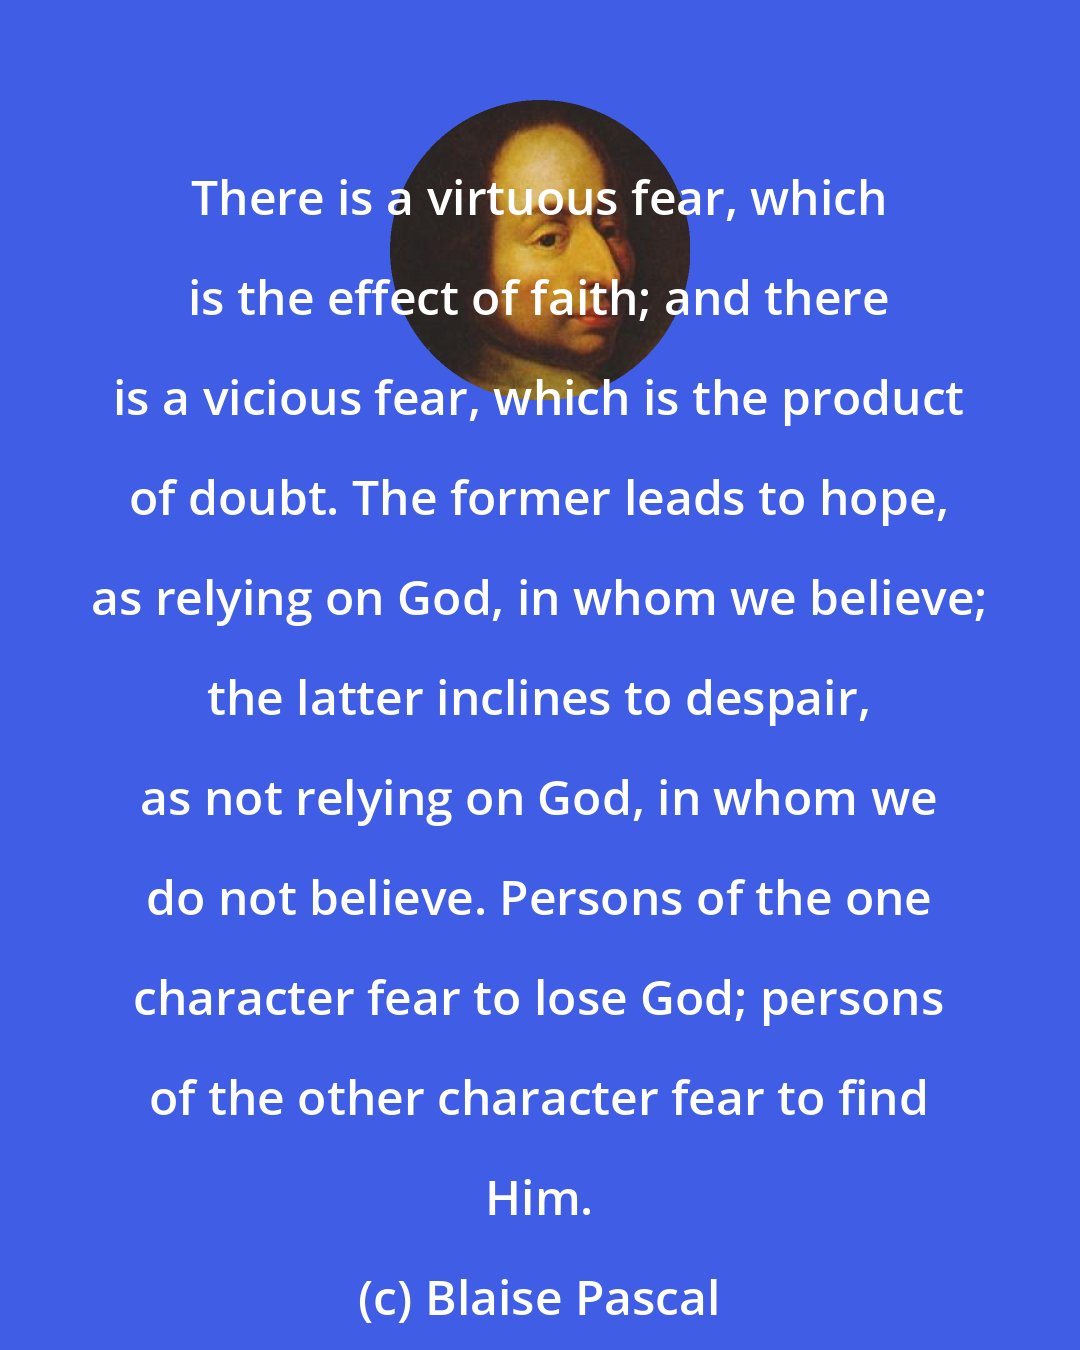 Blaise Pascal: There is a virtuous fear, which is the effect of faith; and there is a vicious fear, which is the product of doubt. The former leads to hope, as relying on God, in whom we believe; the latter inclines to despair, as not relying on God, in whom we do not believe. Persons of the one character fear to lose God; persons of the other character fear to find Him.